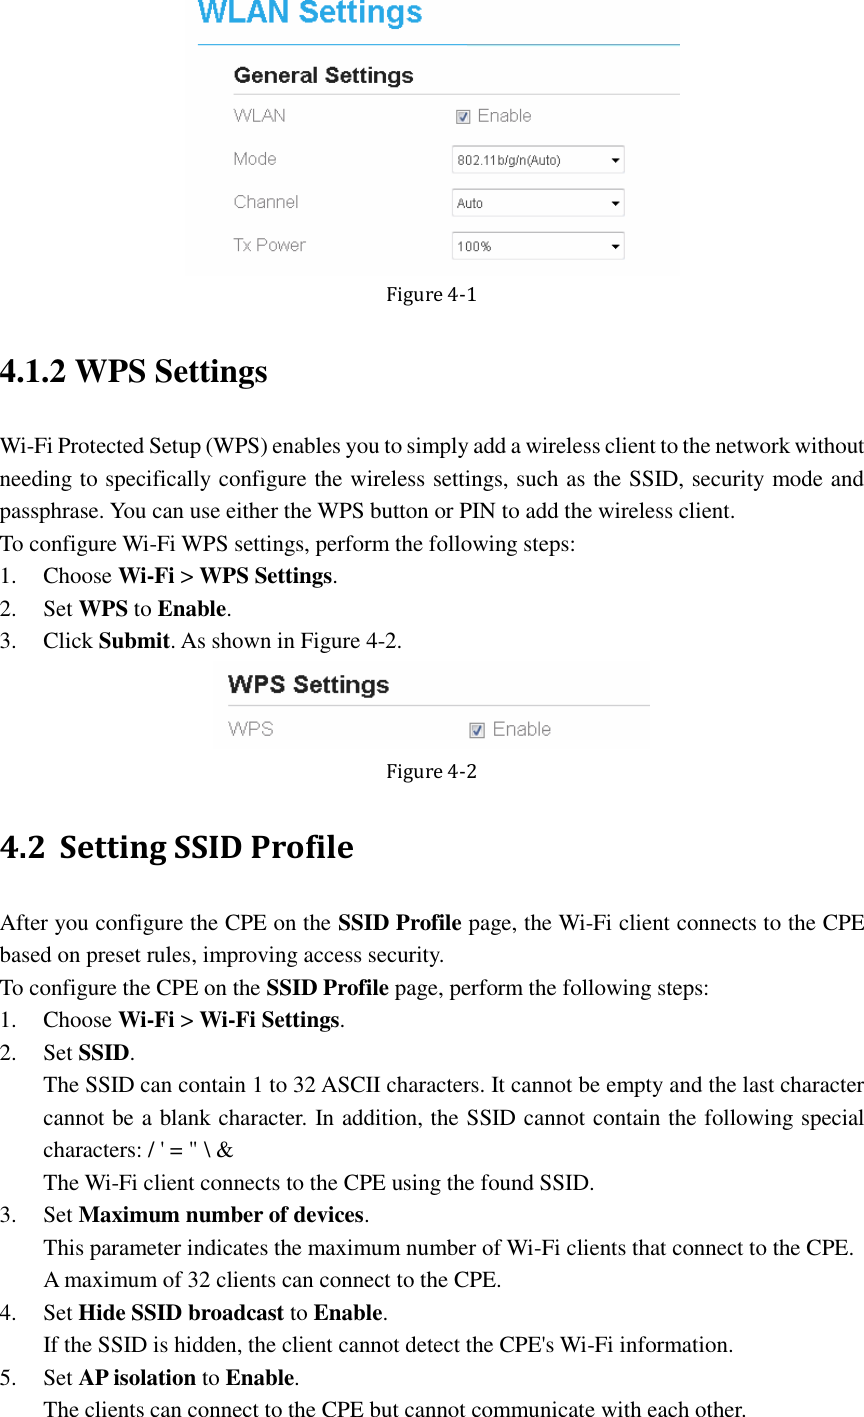    Figure 4-1 4.1.2 WPS Settings Wi-Fi Protected Setup (WPS) enables you to simply add a wireless client to the network without needing to specifically configure the wireless settings, such as the SSID, security mode and passphrase. You can use either the WPS button or PIN to add the wireless client. To configure Wi-Fi WPS settings, perform the following steps: 1. Choose Wi-Fi &gt; WPS Settings. 2. Set WPS to Enable. 3. Click Submit. As shown in Figure 4-2.  Figure 4-2 4.2 Setting SSID Profile After you configure the CPE on the SSID Profile page, the Wi-Fi client connects to the CPE based on preset rules, improving access security. To configure the CPE on the SSID Profile page, perform the following steps: 1. Choose Wi-Fi &gt; Wi-Fi Settings. 2. Set SSID. The SSID can contain 1 to 32 ASCII characters. It cannot be empty and the last character cannot be a blank character. In addition, the SSID cannot contain the following special characters: / &apos; = &quot; \ &amp; The Wi-Fi client connects to the CPE using the found SSID. 3. Set Maximum number of devices. This parameter indicates the maximum number of Wi-Fi clients that connect to the CPE.   A maximum of 32 clients can connect to the CPE. 4. Set Hide SSID broadcast to Enable. If the SSID is hidden, the client cannot detect the CPE&apos;s Wi-Fi information. 5. Set AP isolation to Enable. The clients can connect to the CPE but cannot communicate with each other. 